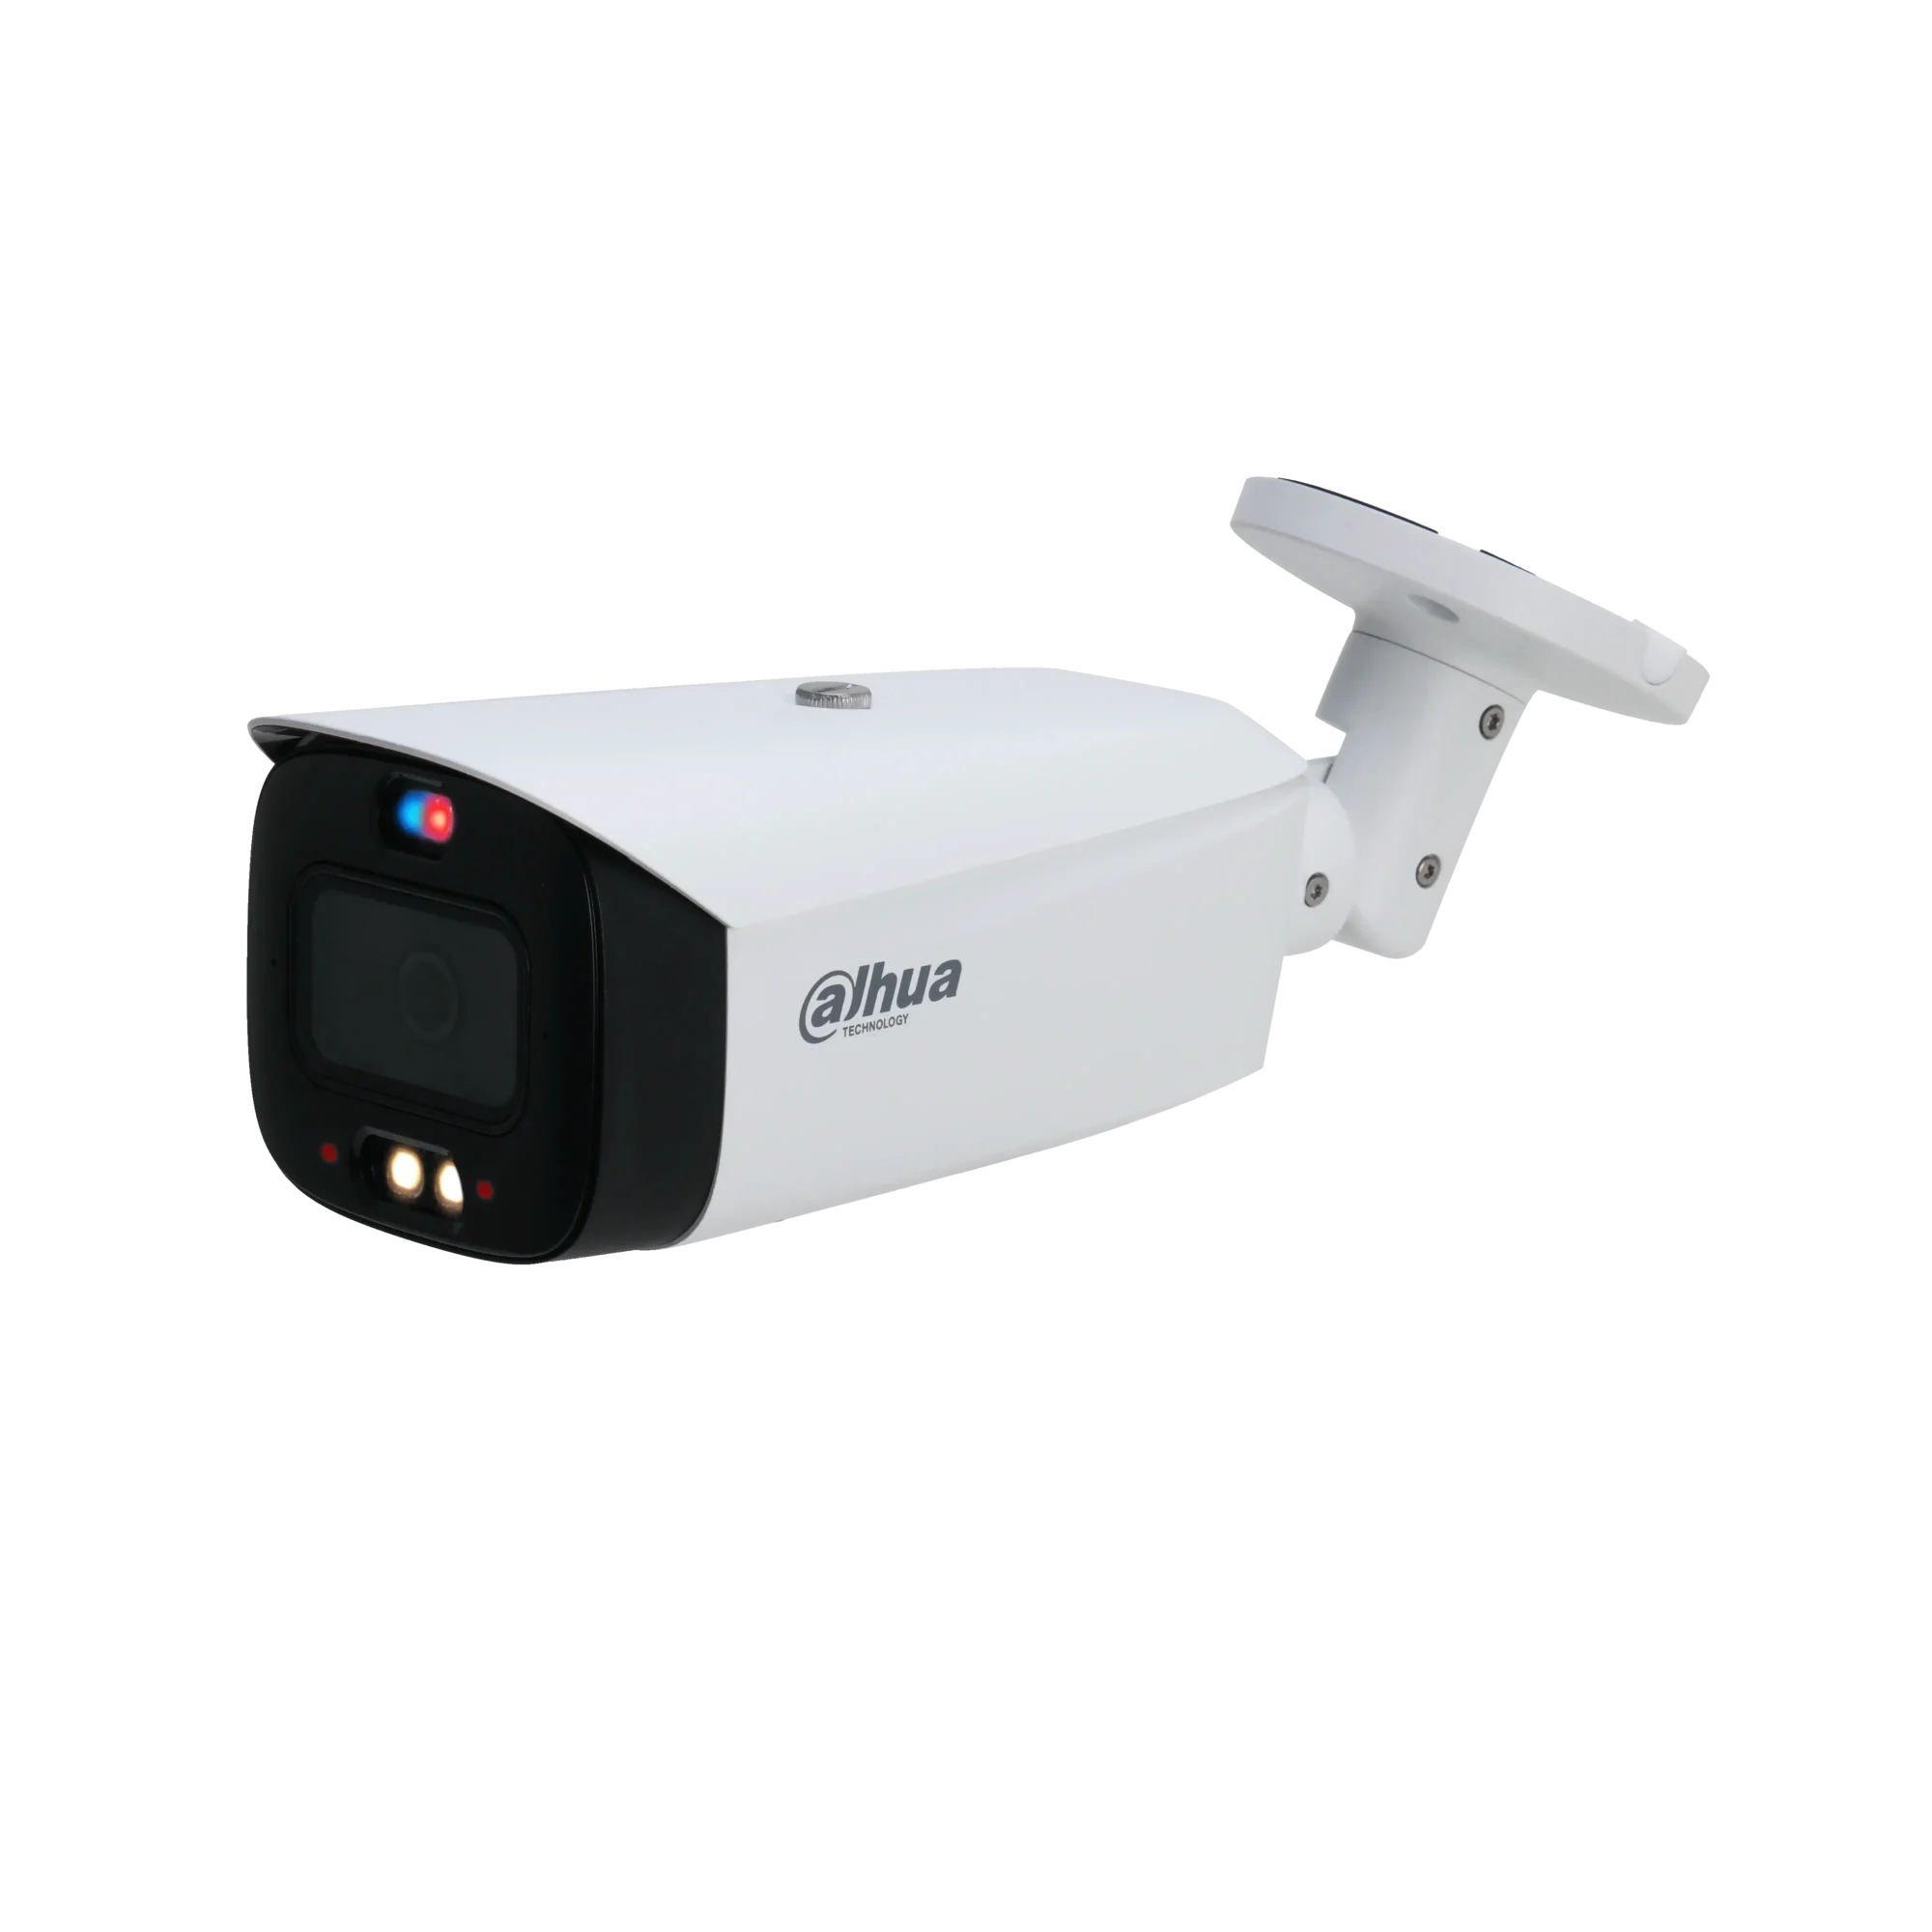 Dahua IPC-HFW3849T1-AS-PV - 8MP Smart Network Bullet Camera with TiOC 2.0 Active Deterrence